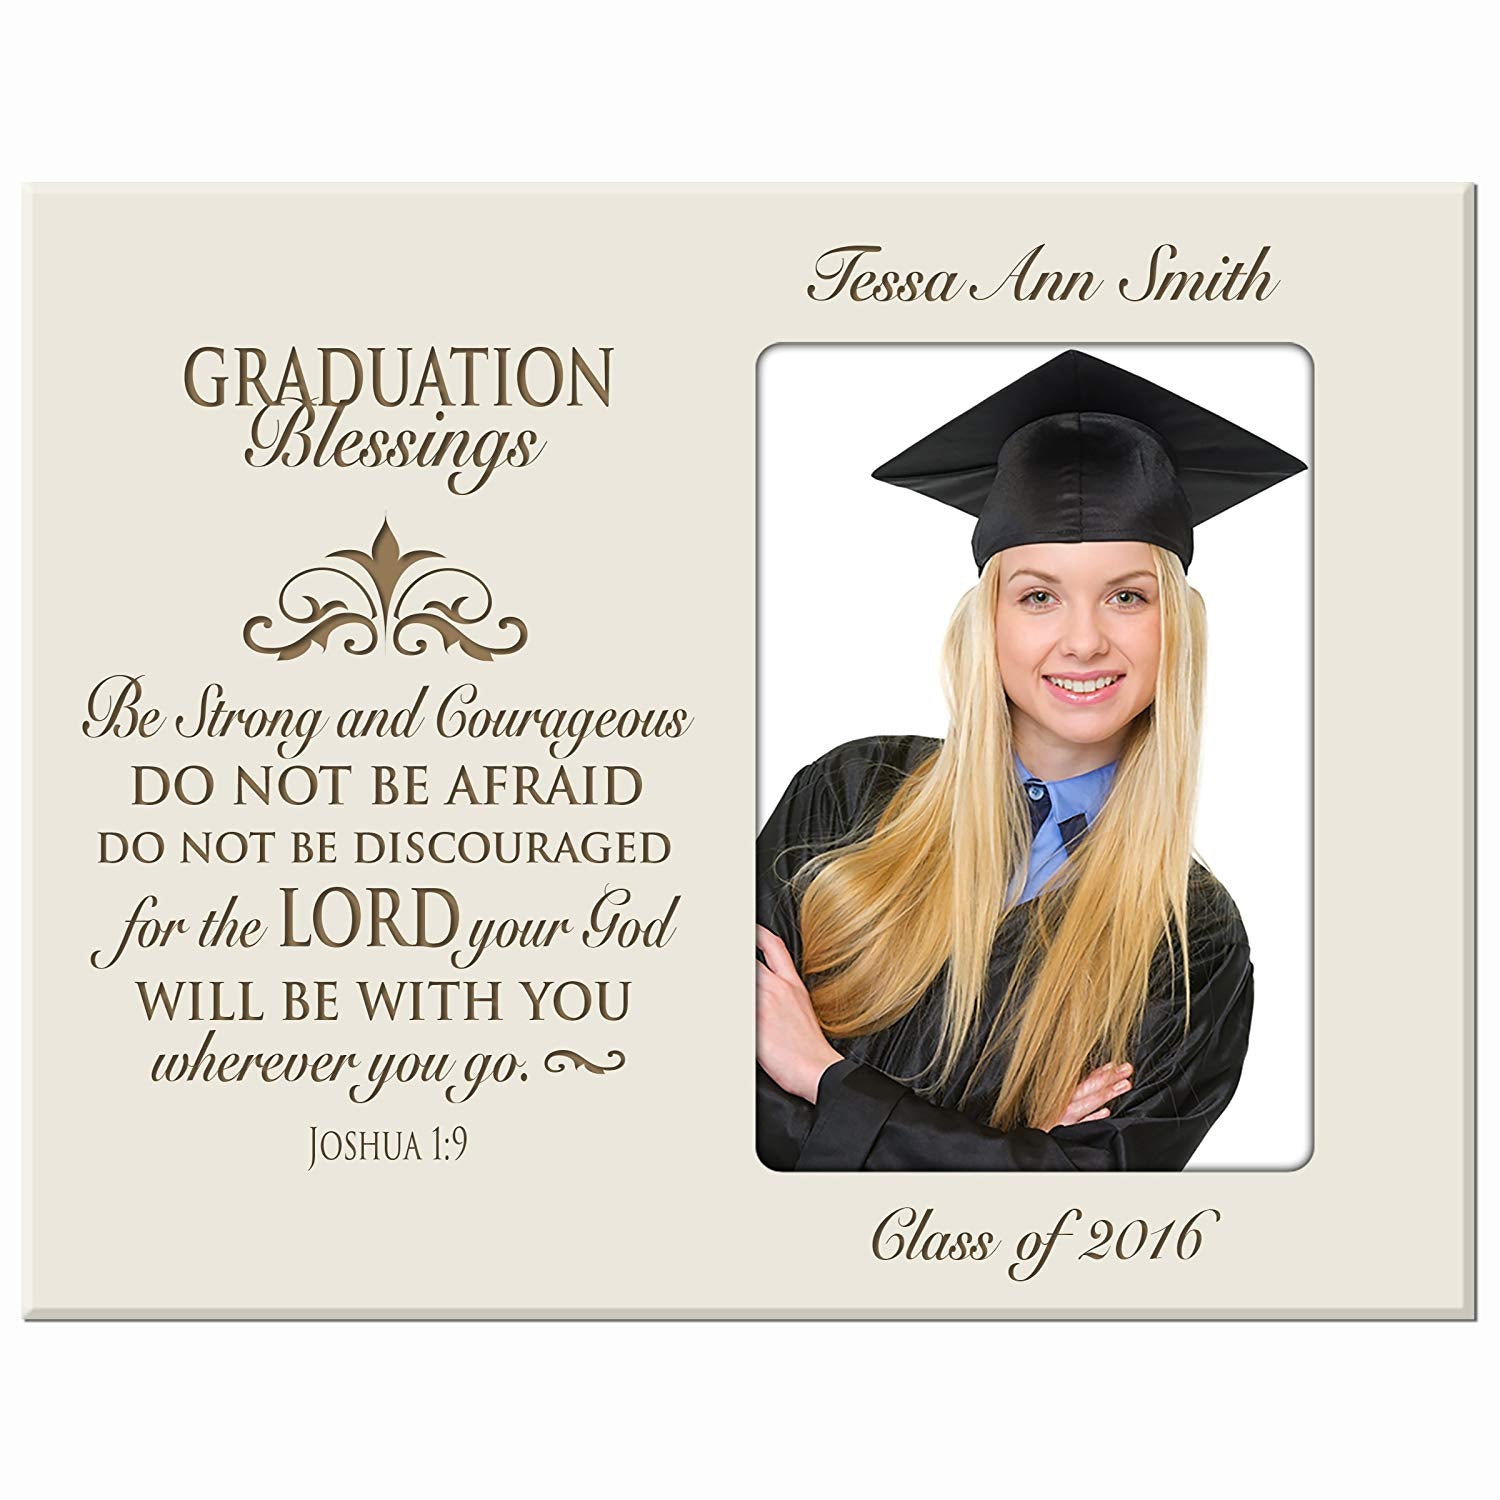 Personalized Graduation Picture Frame Gift - Strong and Courageous - LifeSong Milestones